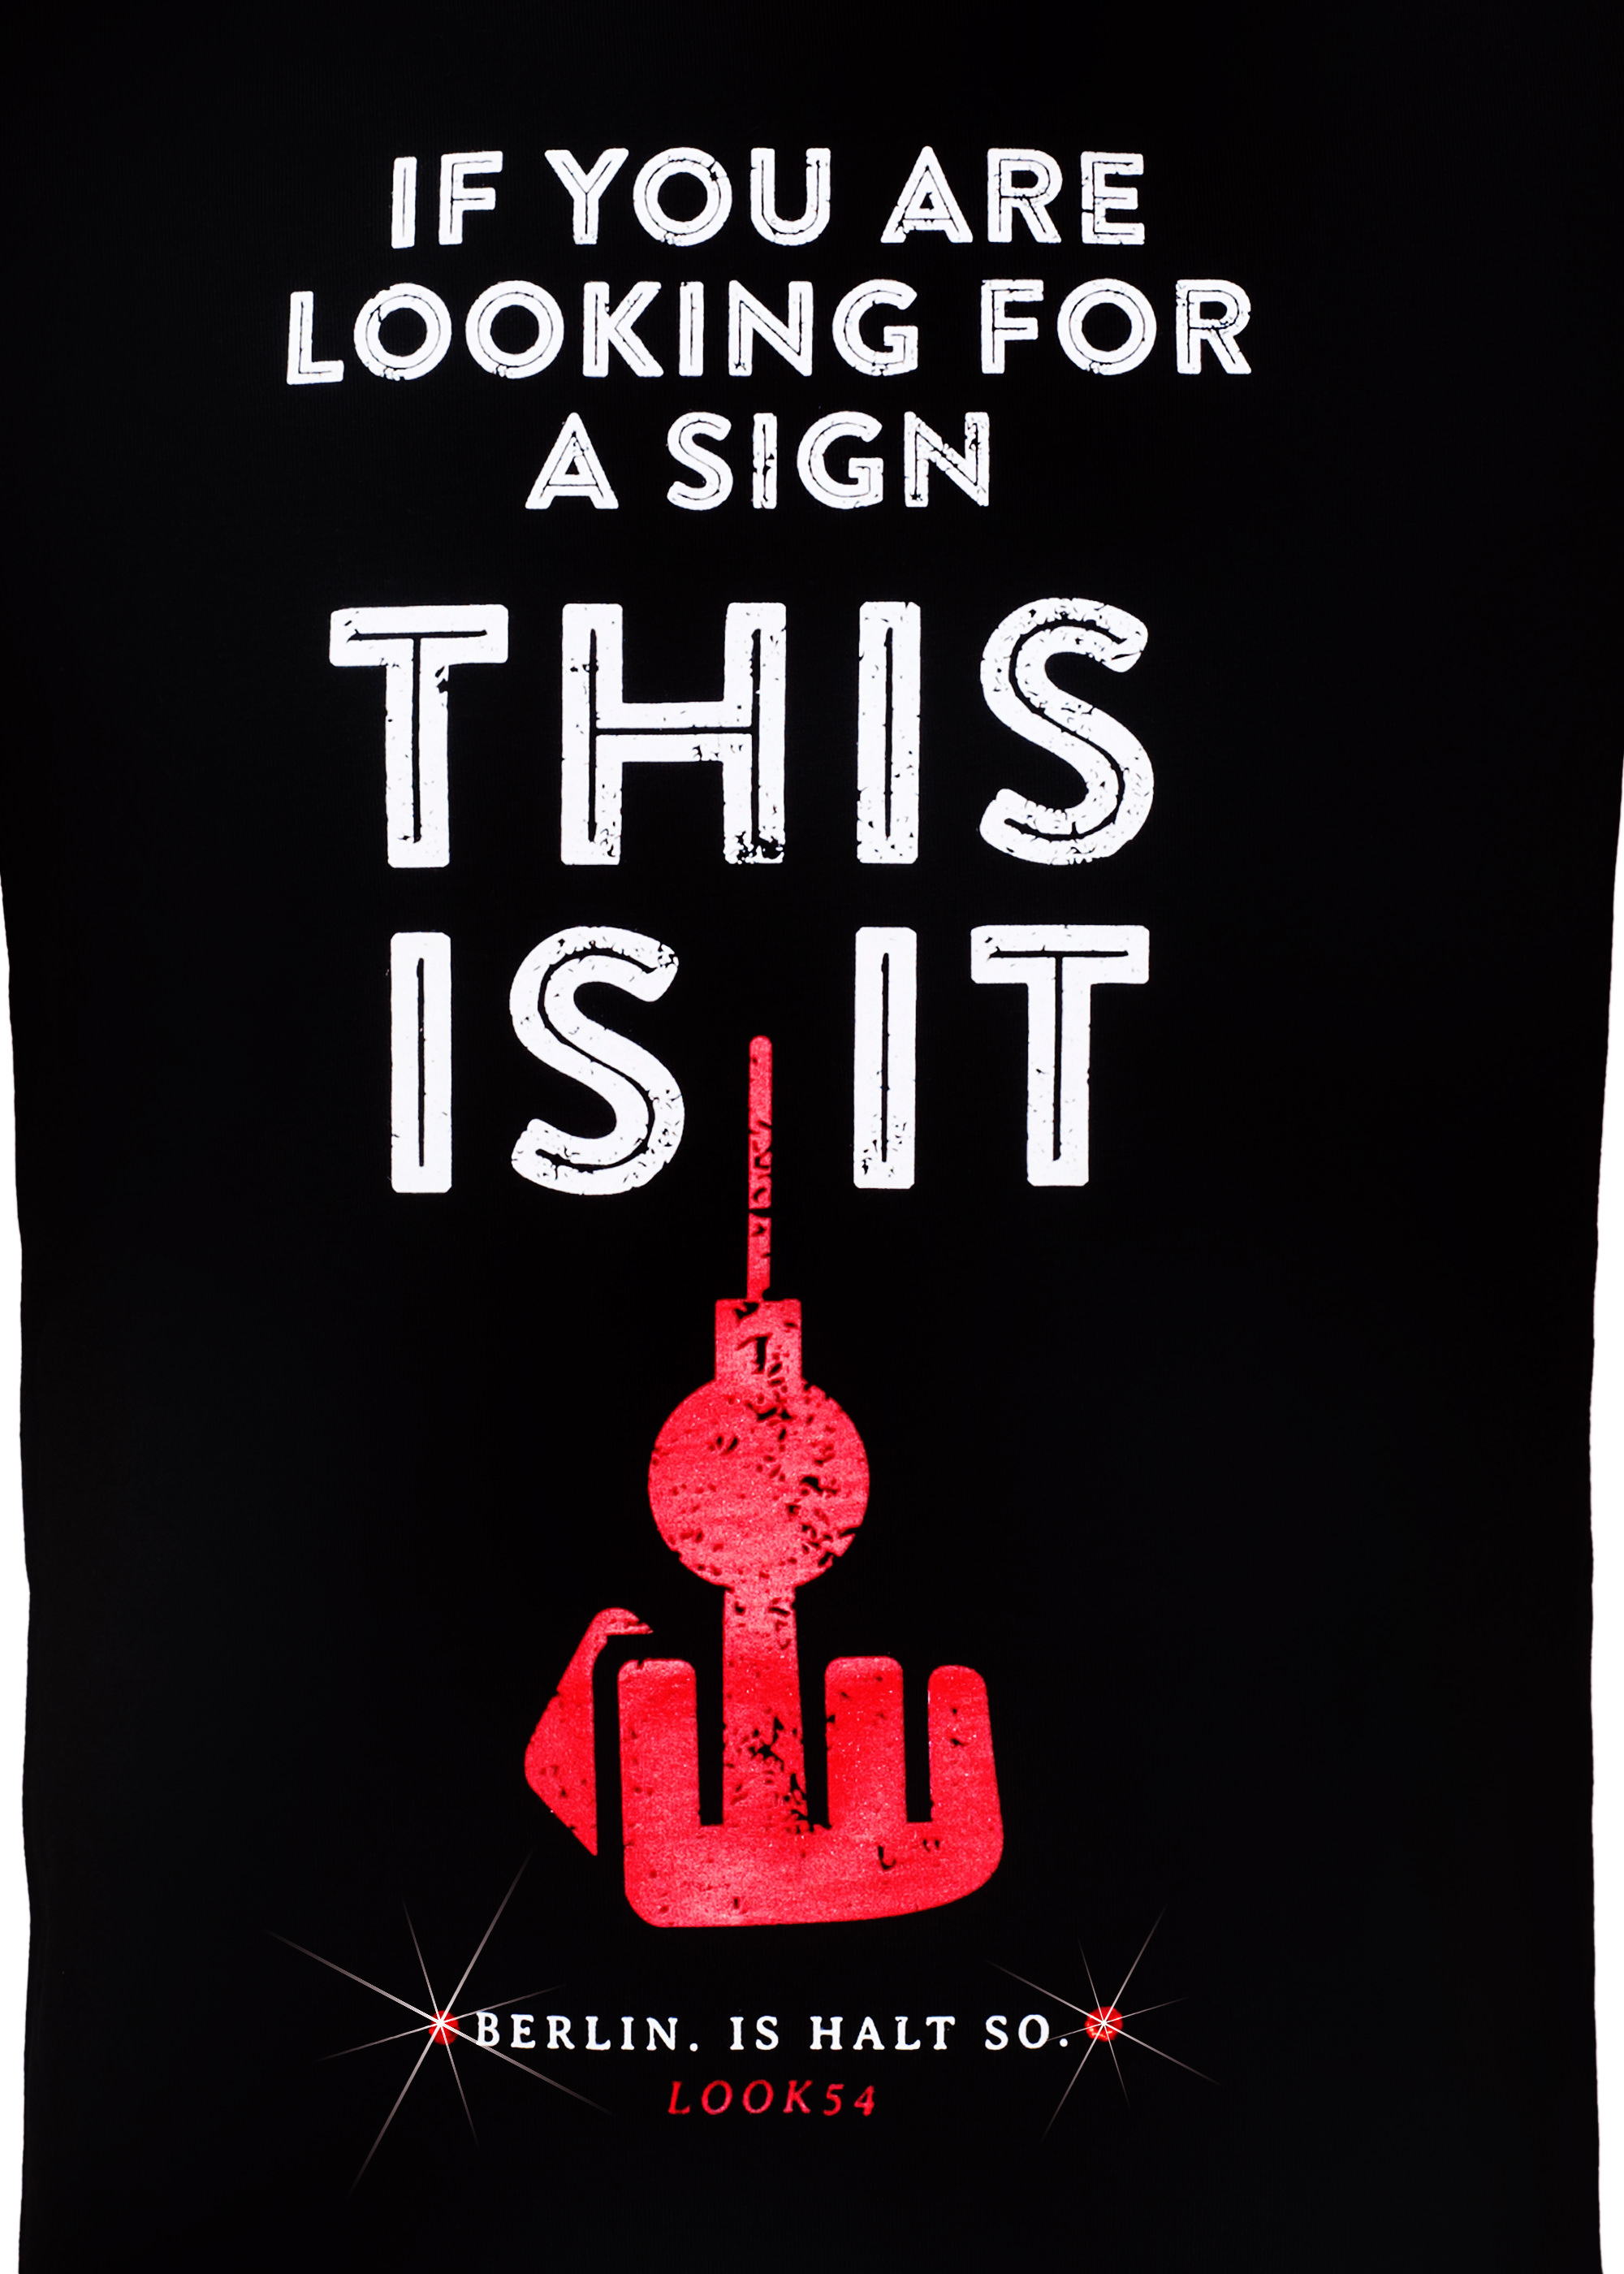 Looking for a sign - T-Shirt